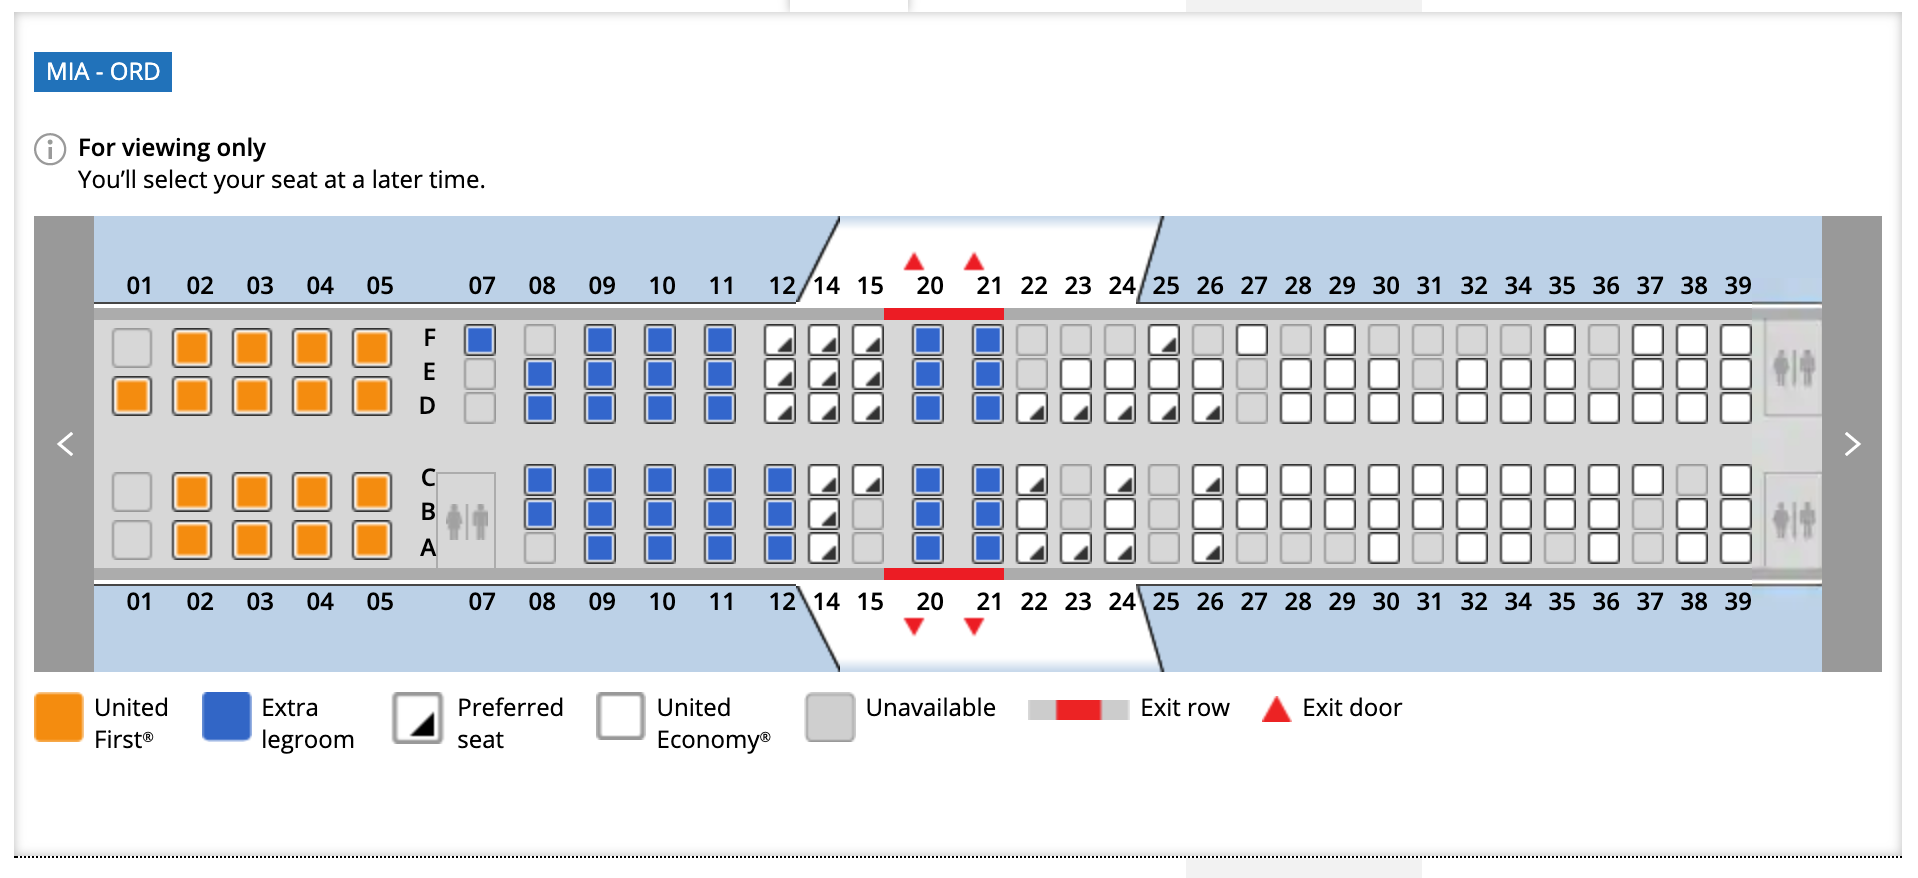 Miami to Chicago United Airlines flight seat assignments March 28, 2020